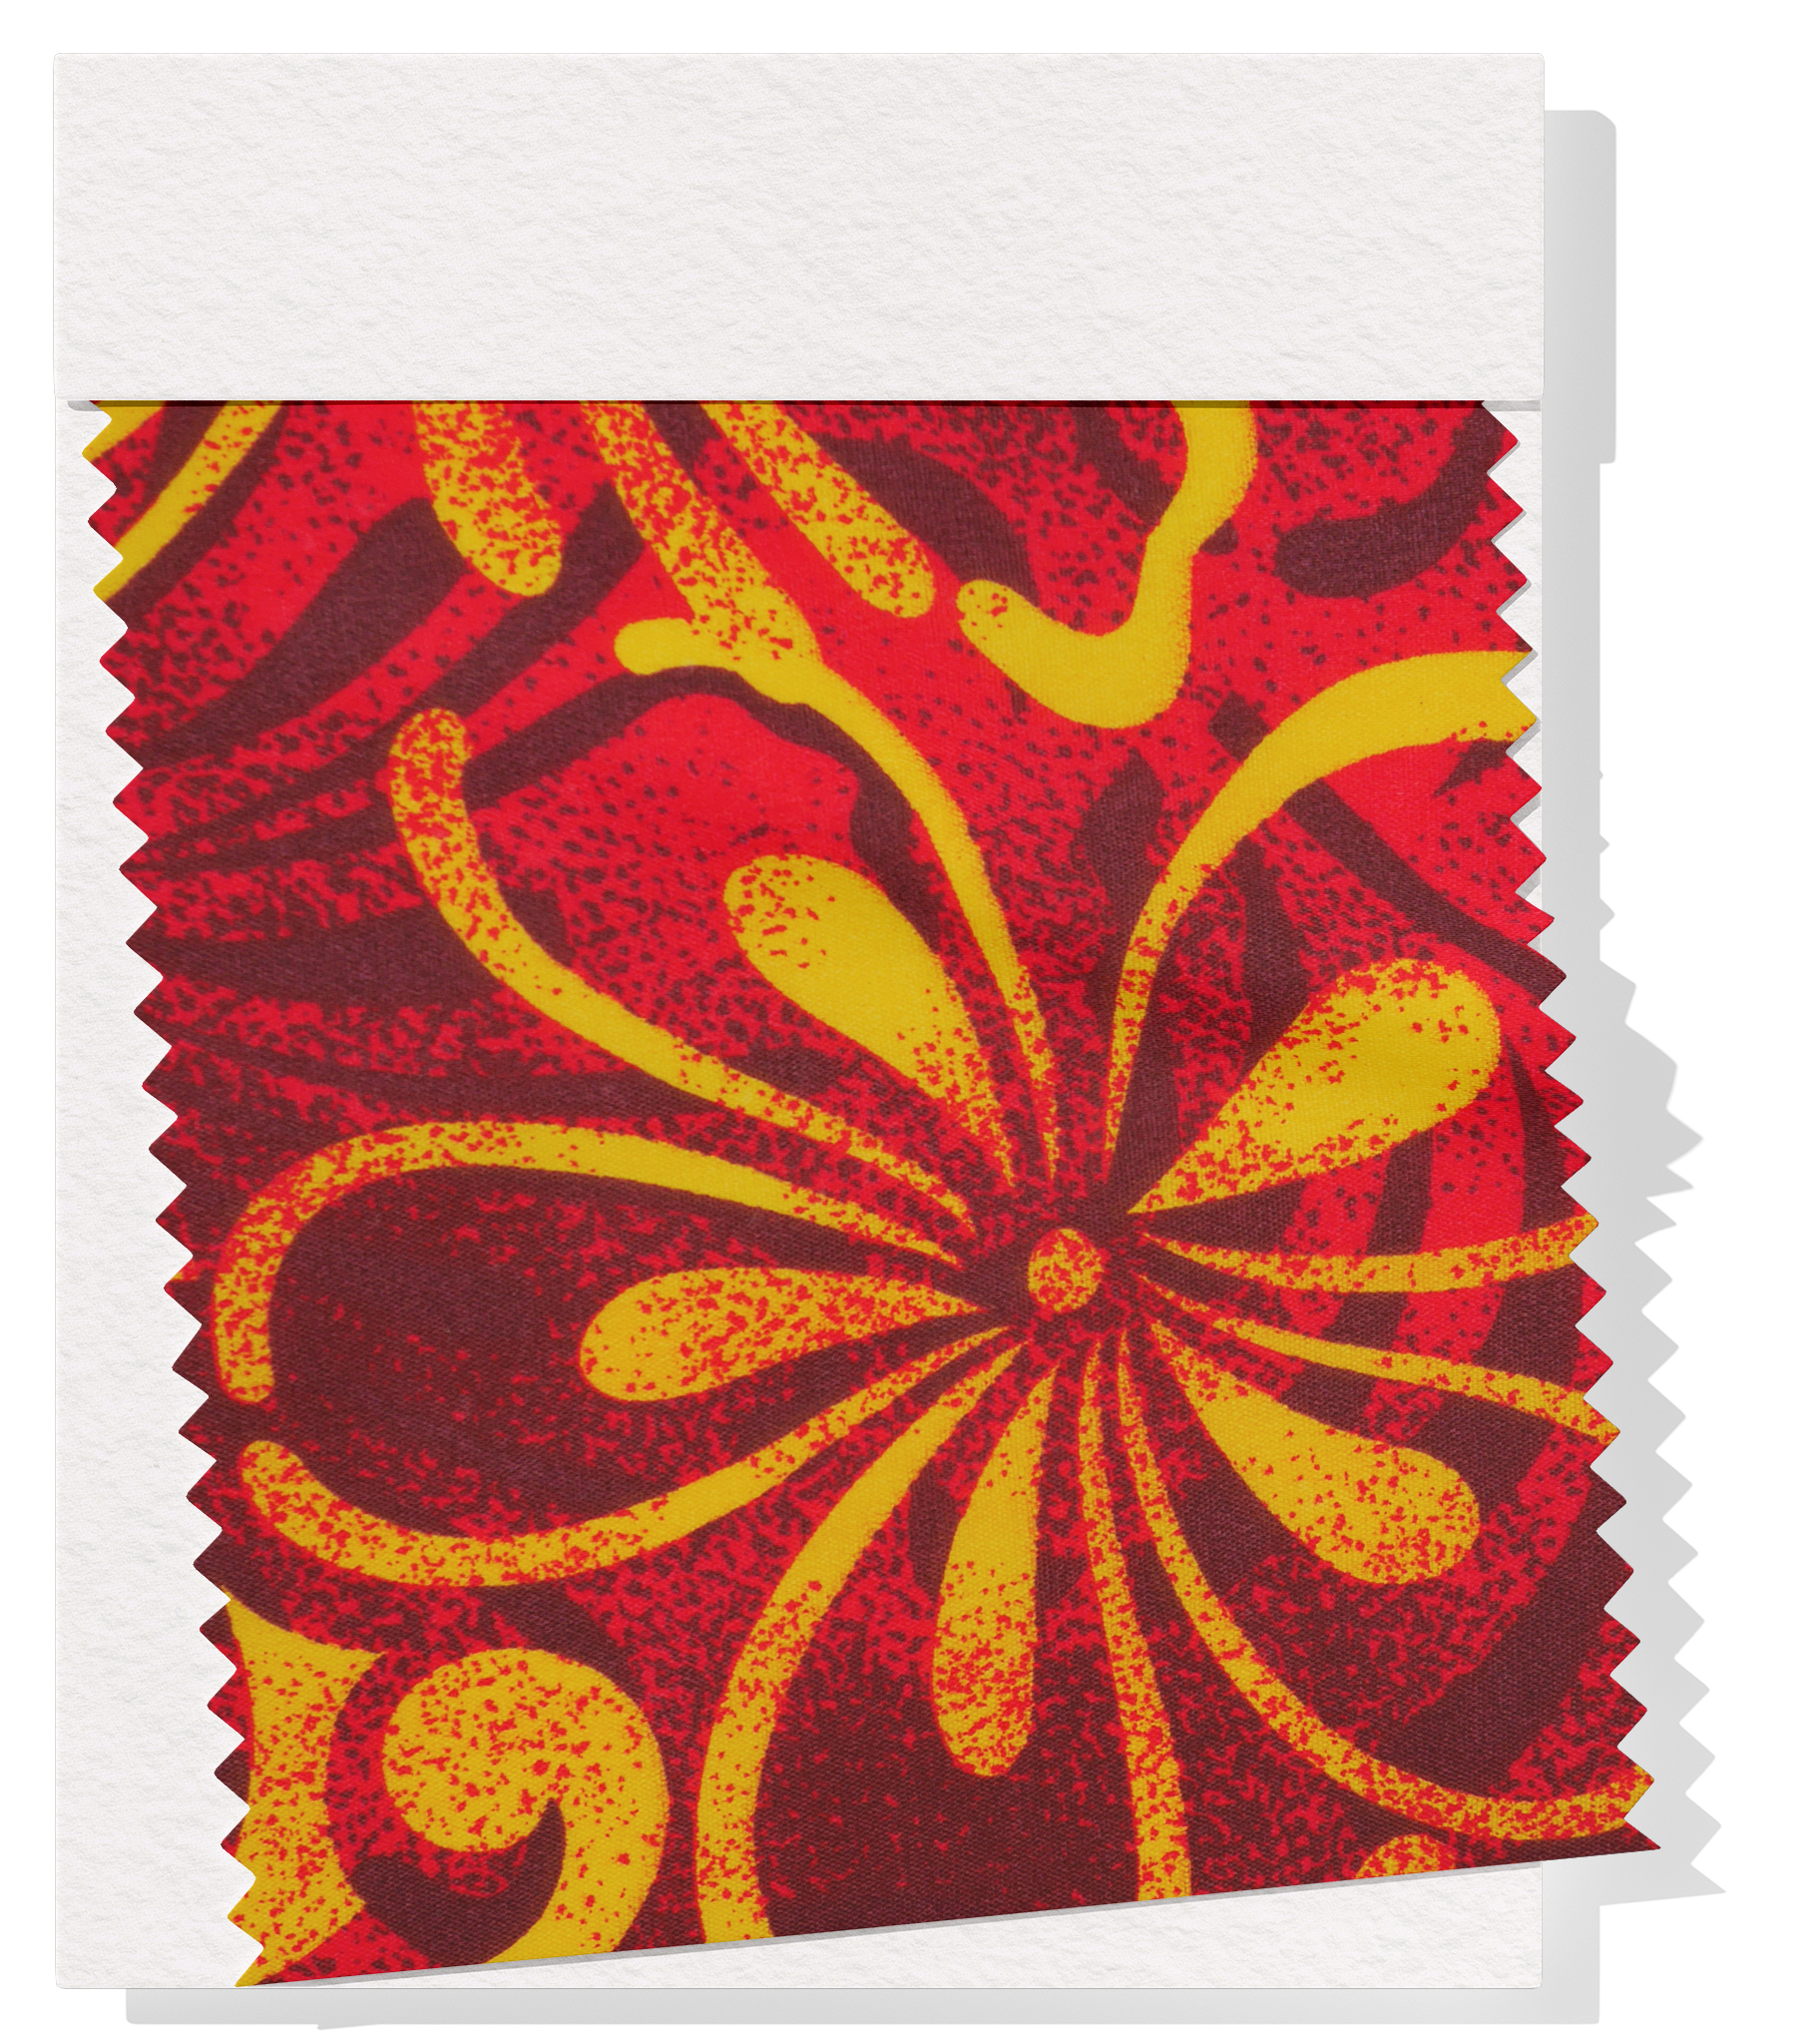 Polyester / Cotton Pacific Print $3.00p/m- Red & Yellow Design D